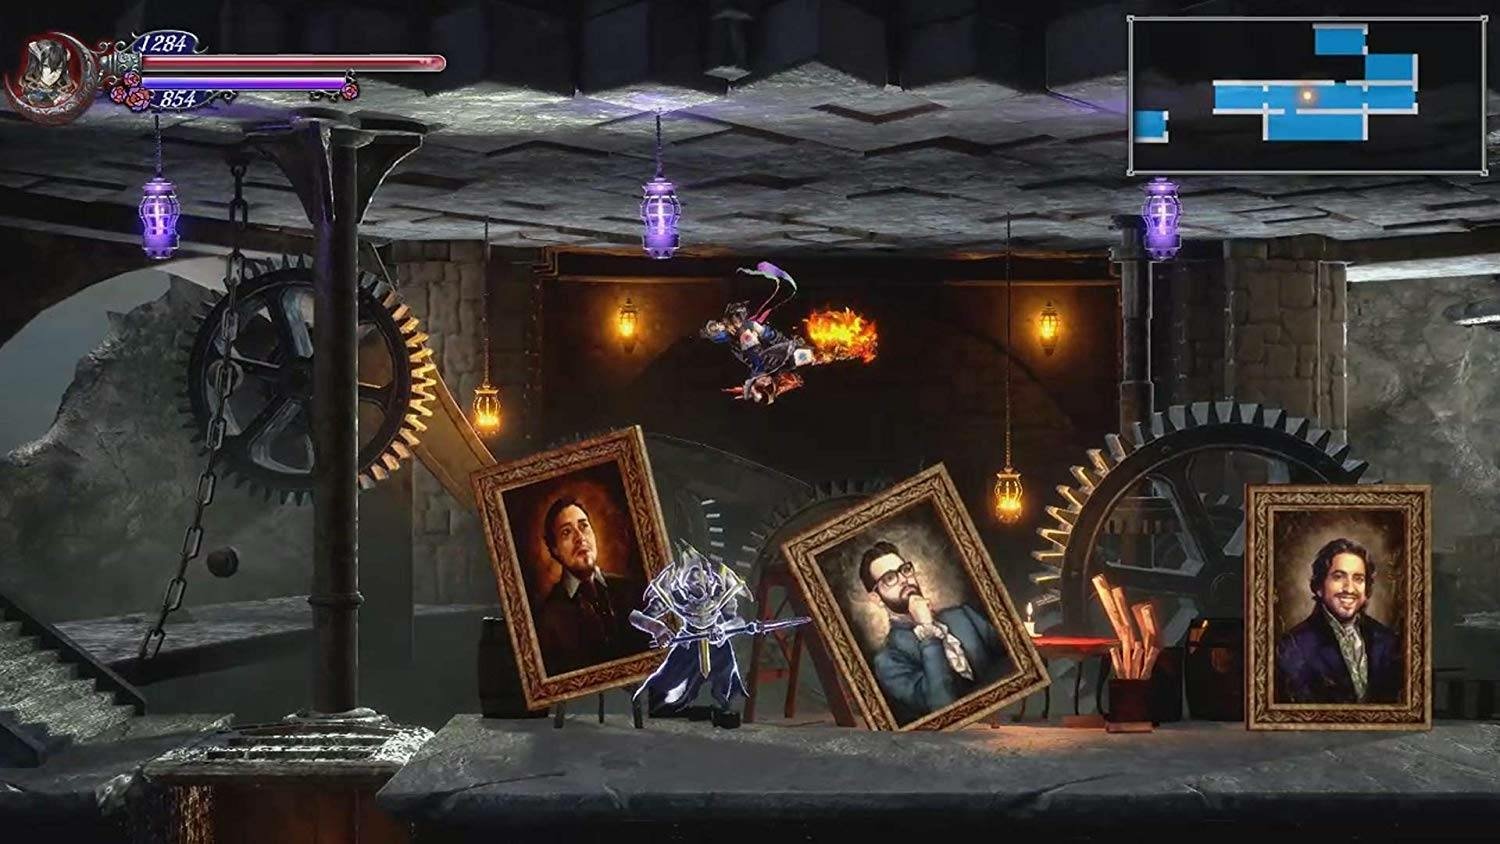 A scene from Bloodstained: Ritual of the Night video game showing a character casting a spell near portraits in a gothic castle environment.